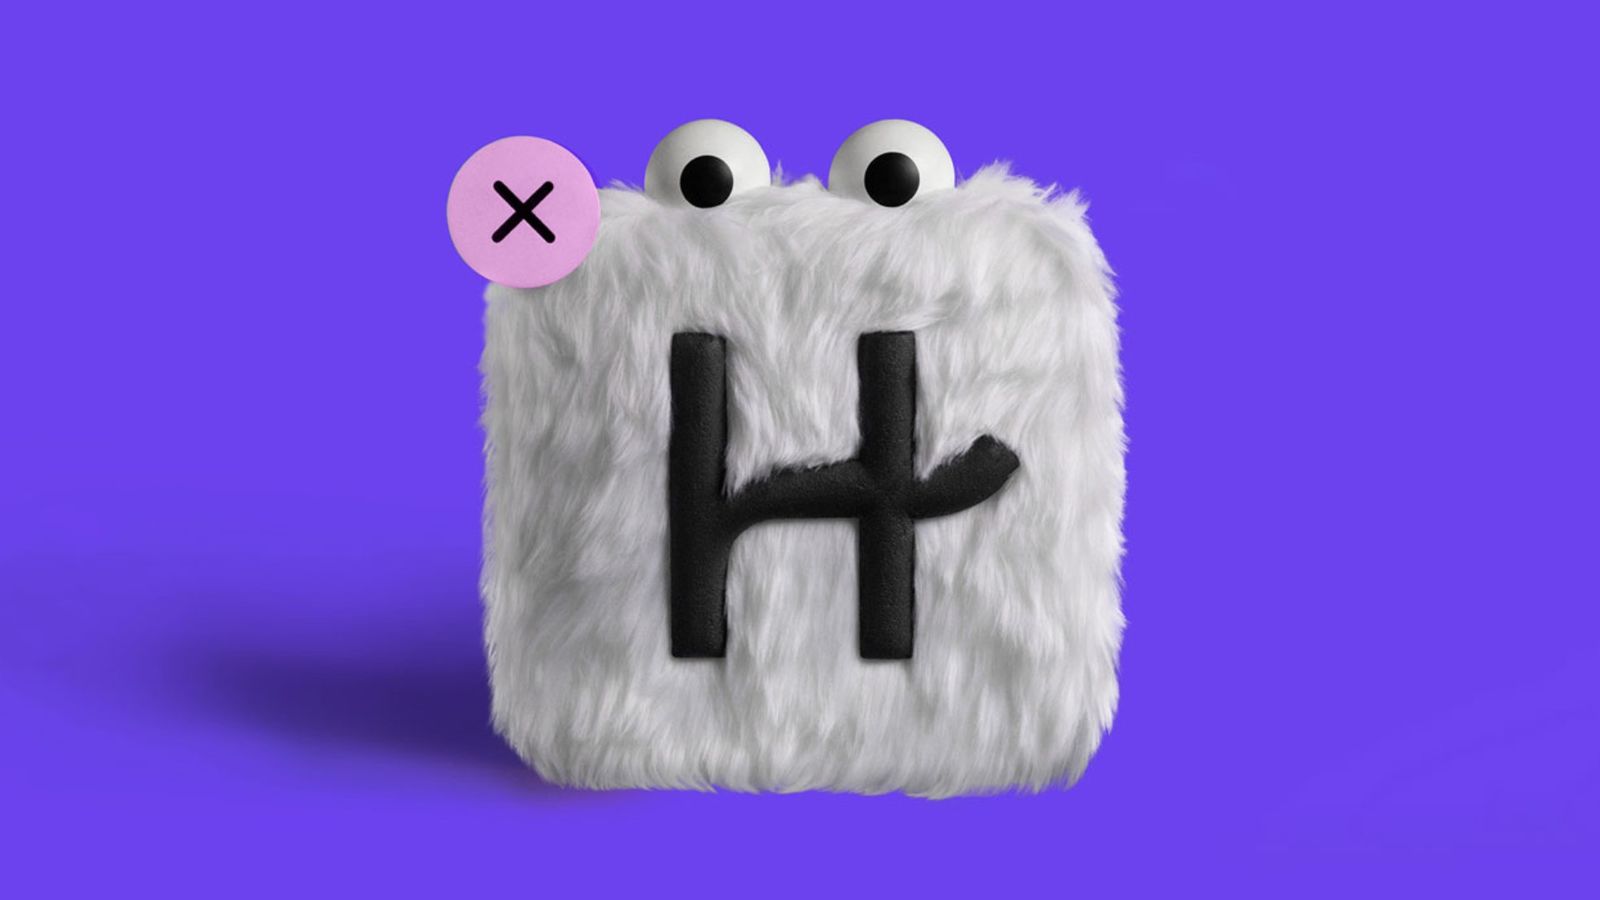 An image of the mascot of Hinge - If You X Someone on Hinge Can They Still See You and Like You?